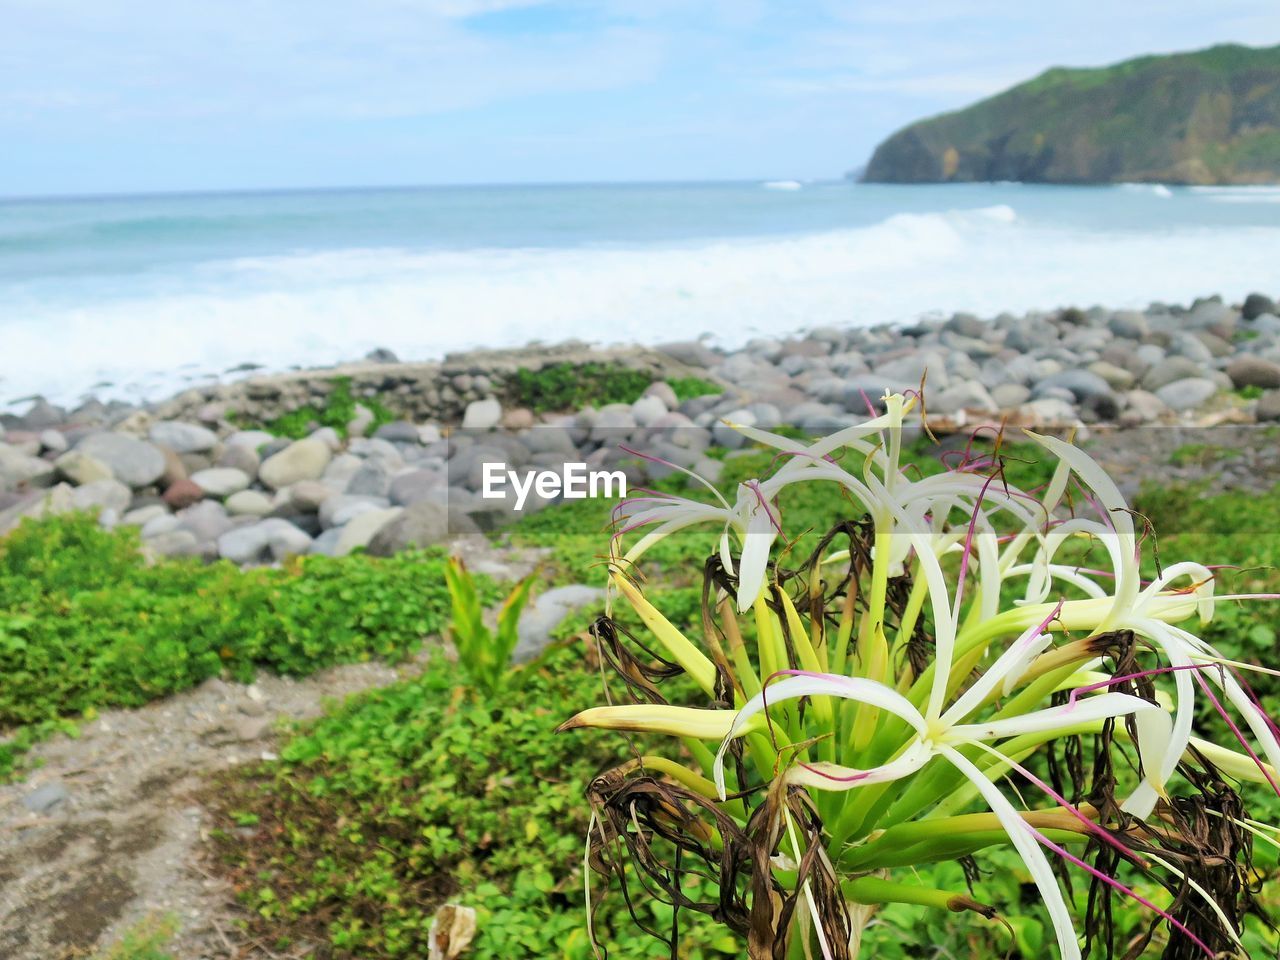 SCENIC VIEW OF SEA AND PLANTS